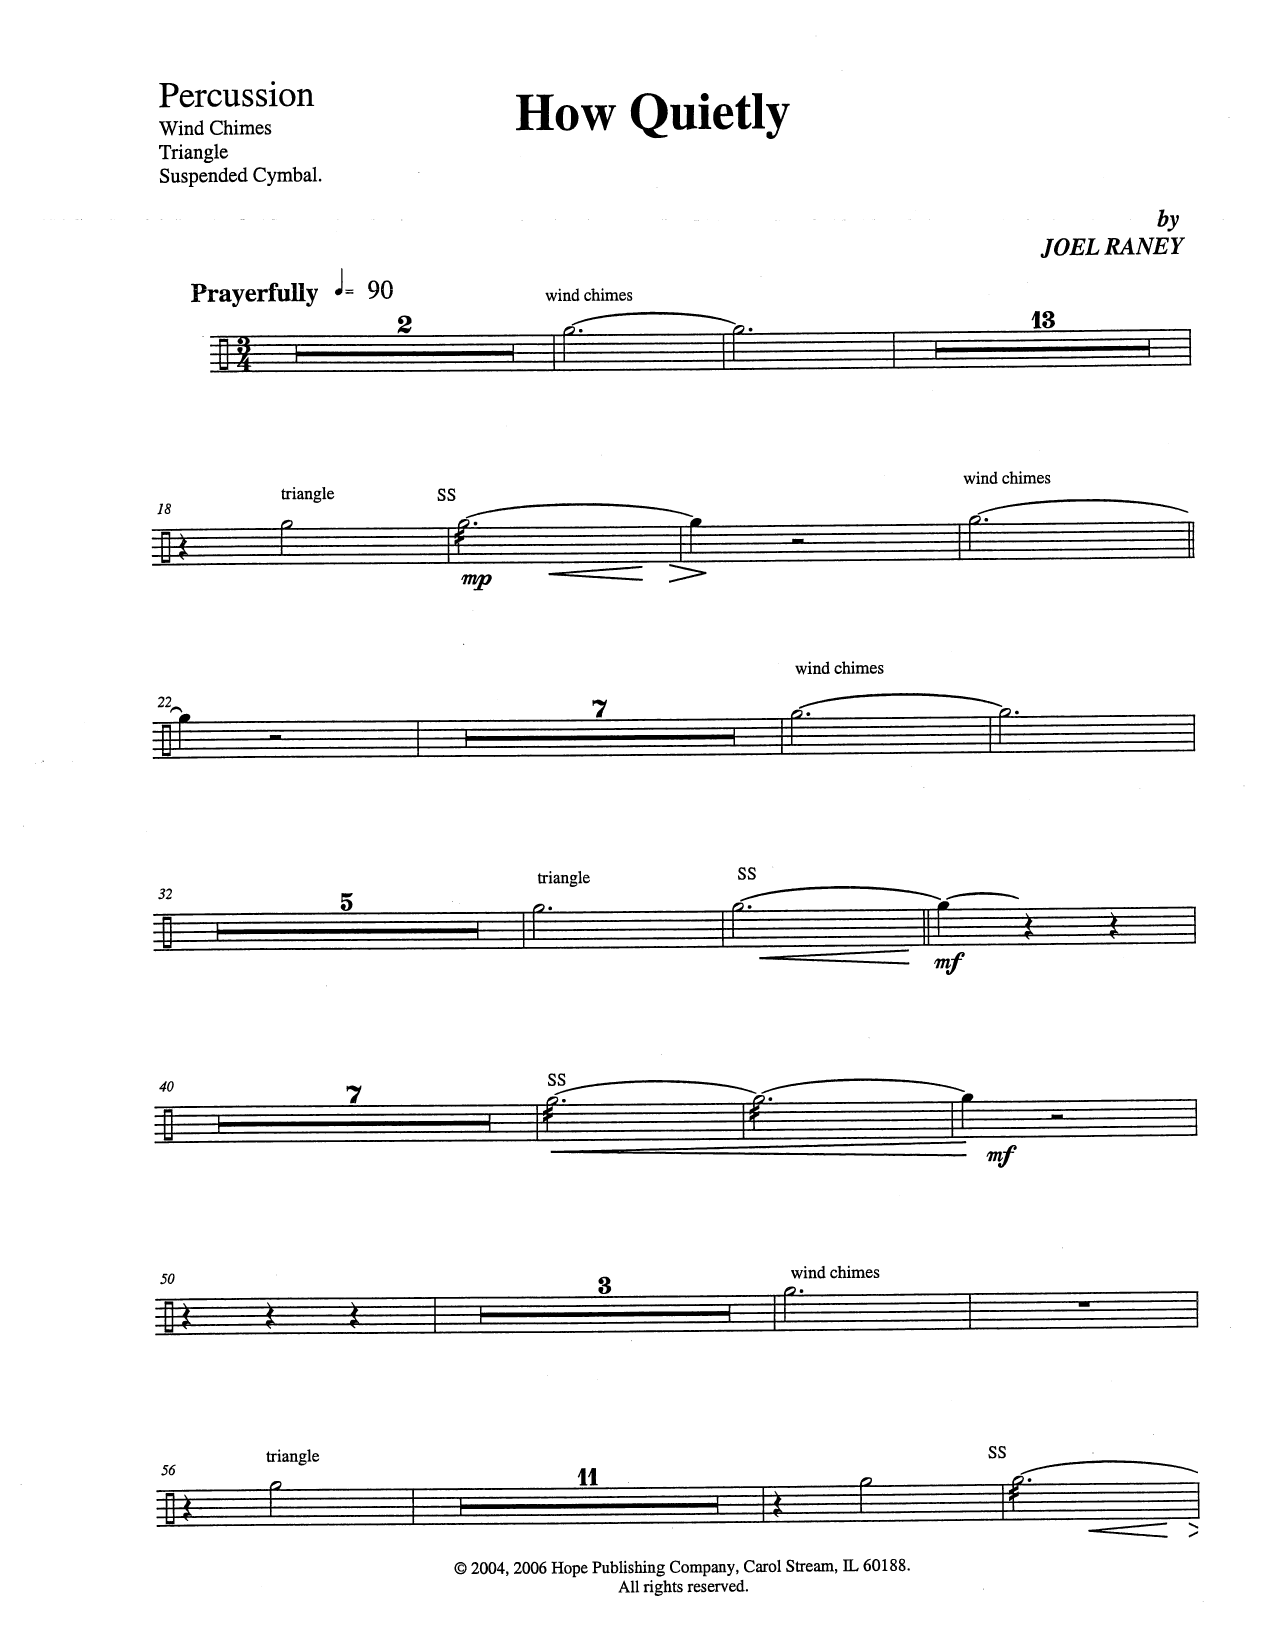 Download Joel Raney How Quietly - Percussion Sheet Music